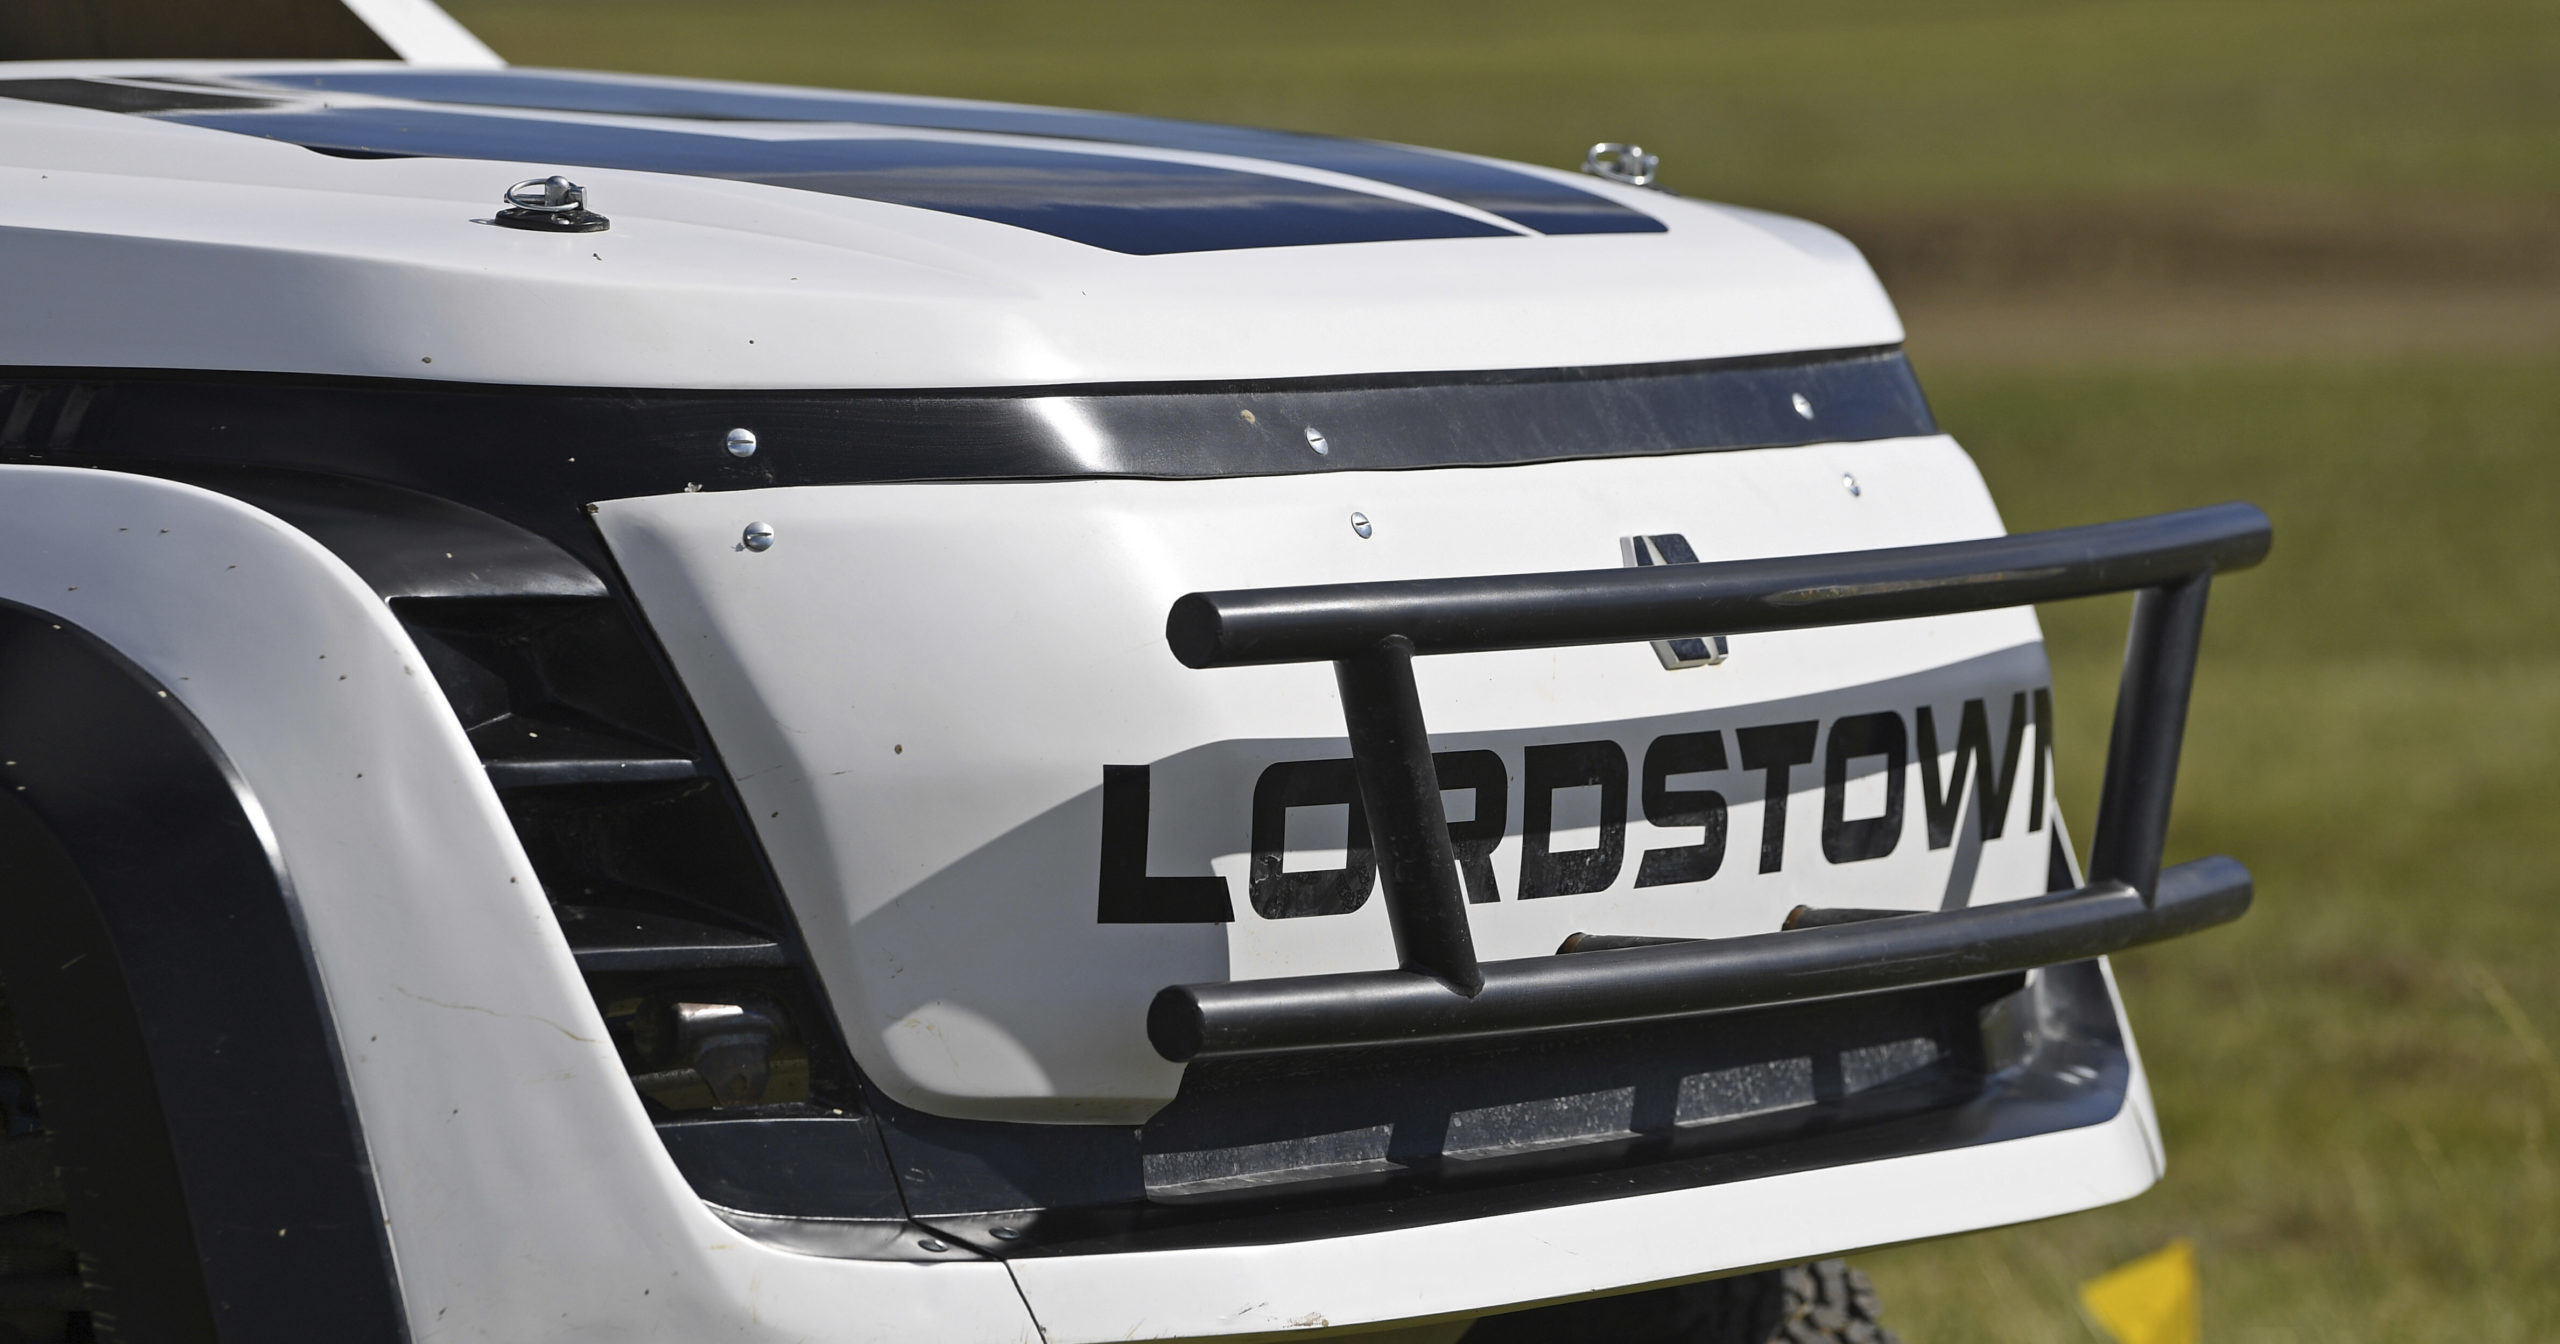 A Lordstown Motors pickup truck is displayed during a media tour of the company's complex in Lordstown, Ohio, on June 22, 2021.